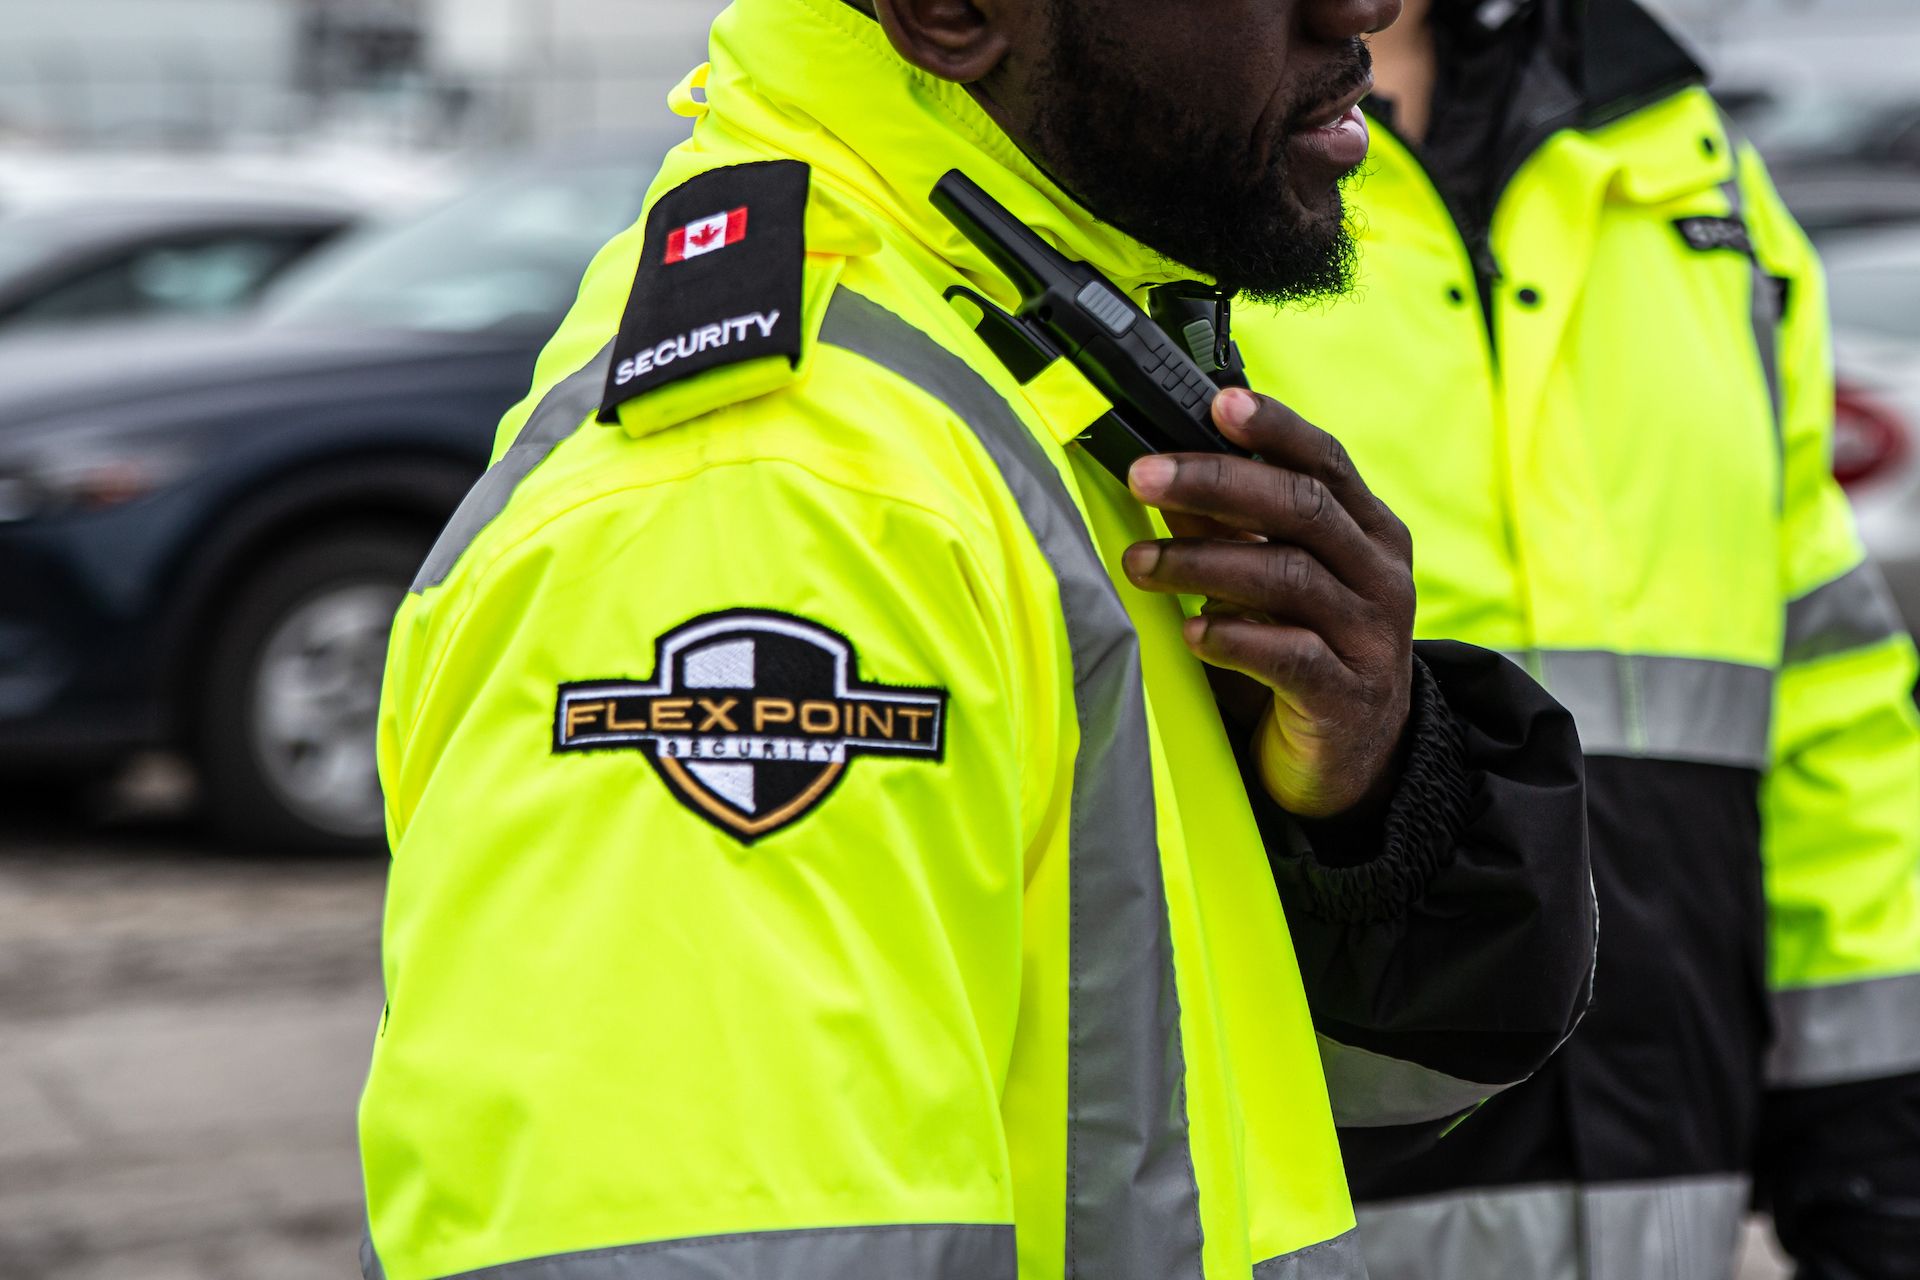 A male Flex Point Security guard wearing a branded yellow jacket reaching for a walkie talkie that is on his shoulder